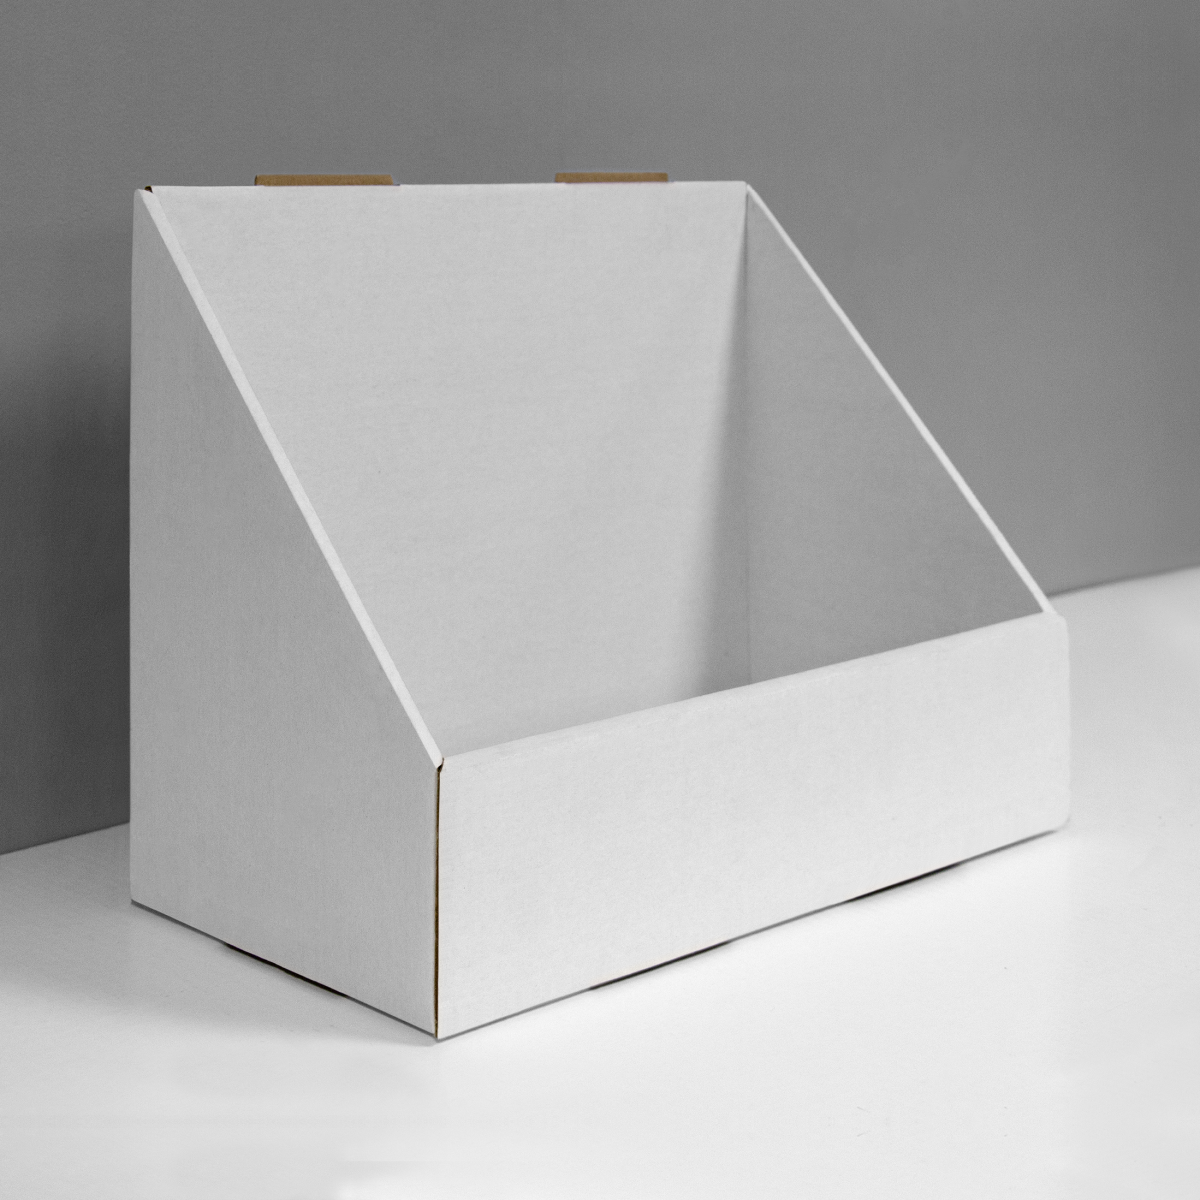 Cardboard counter display with high front - white